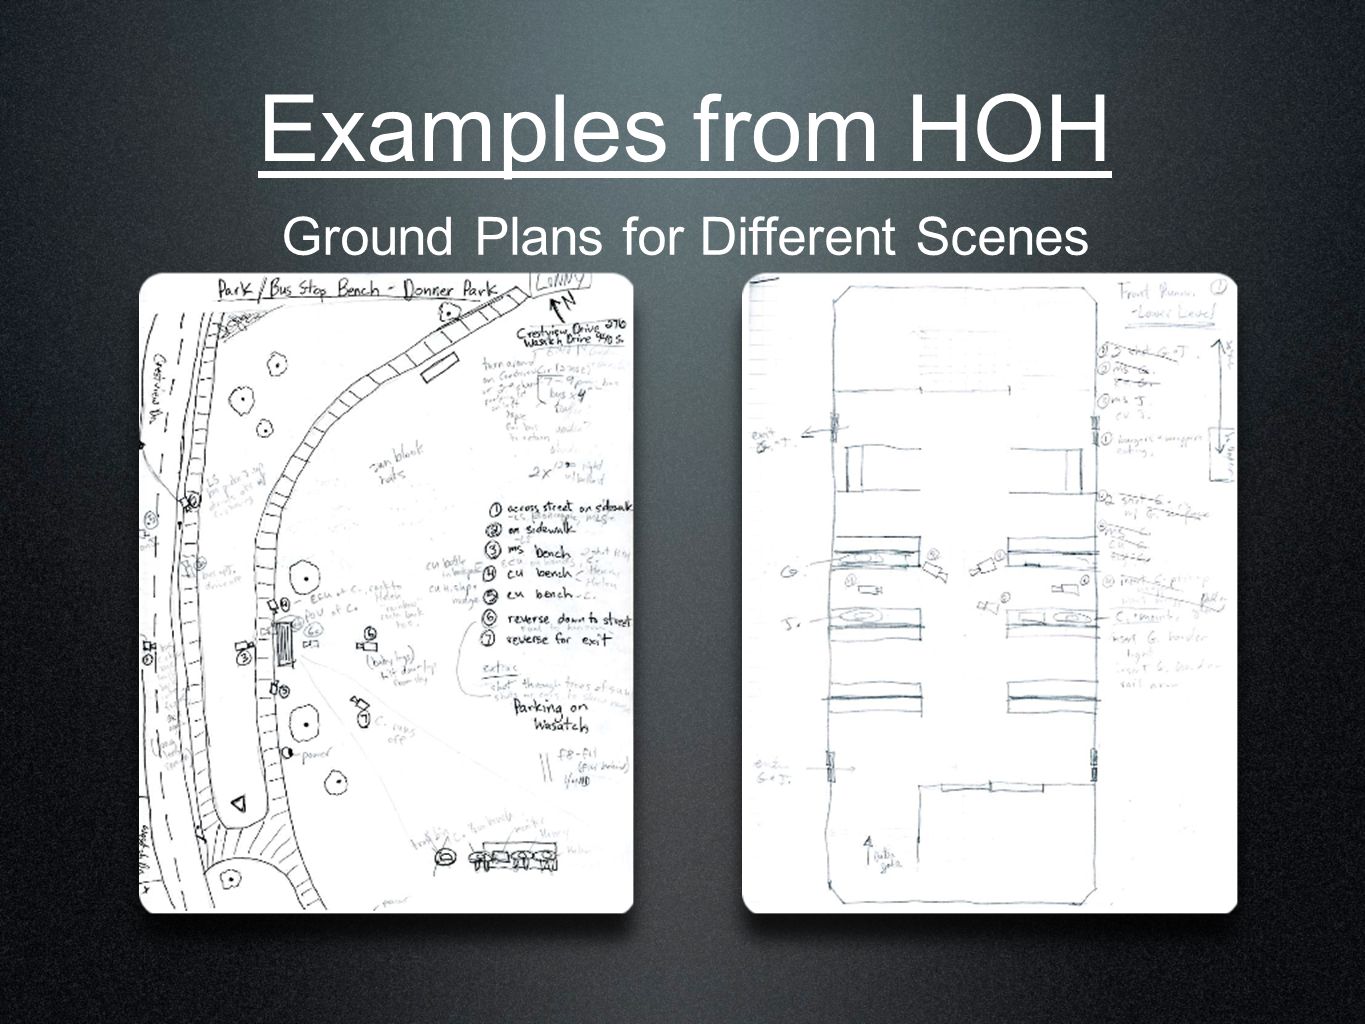 Examples from HOH Ground Plans for Different Scenes